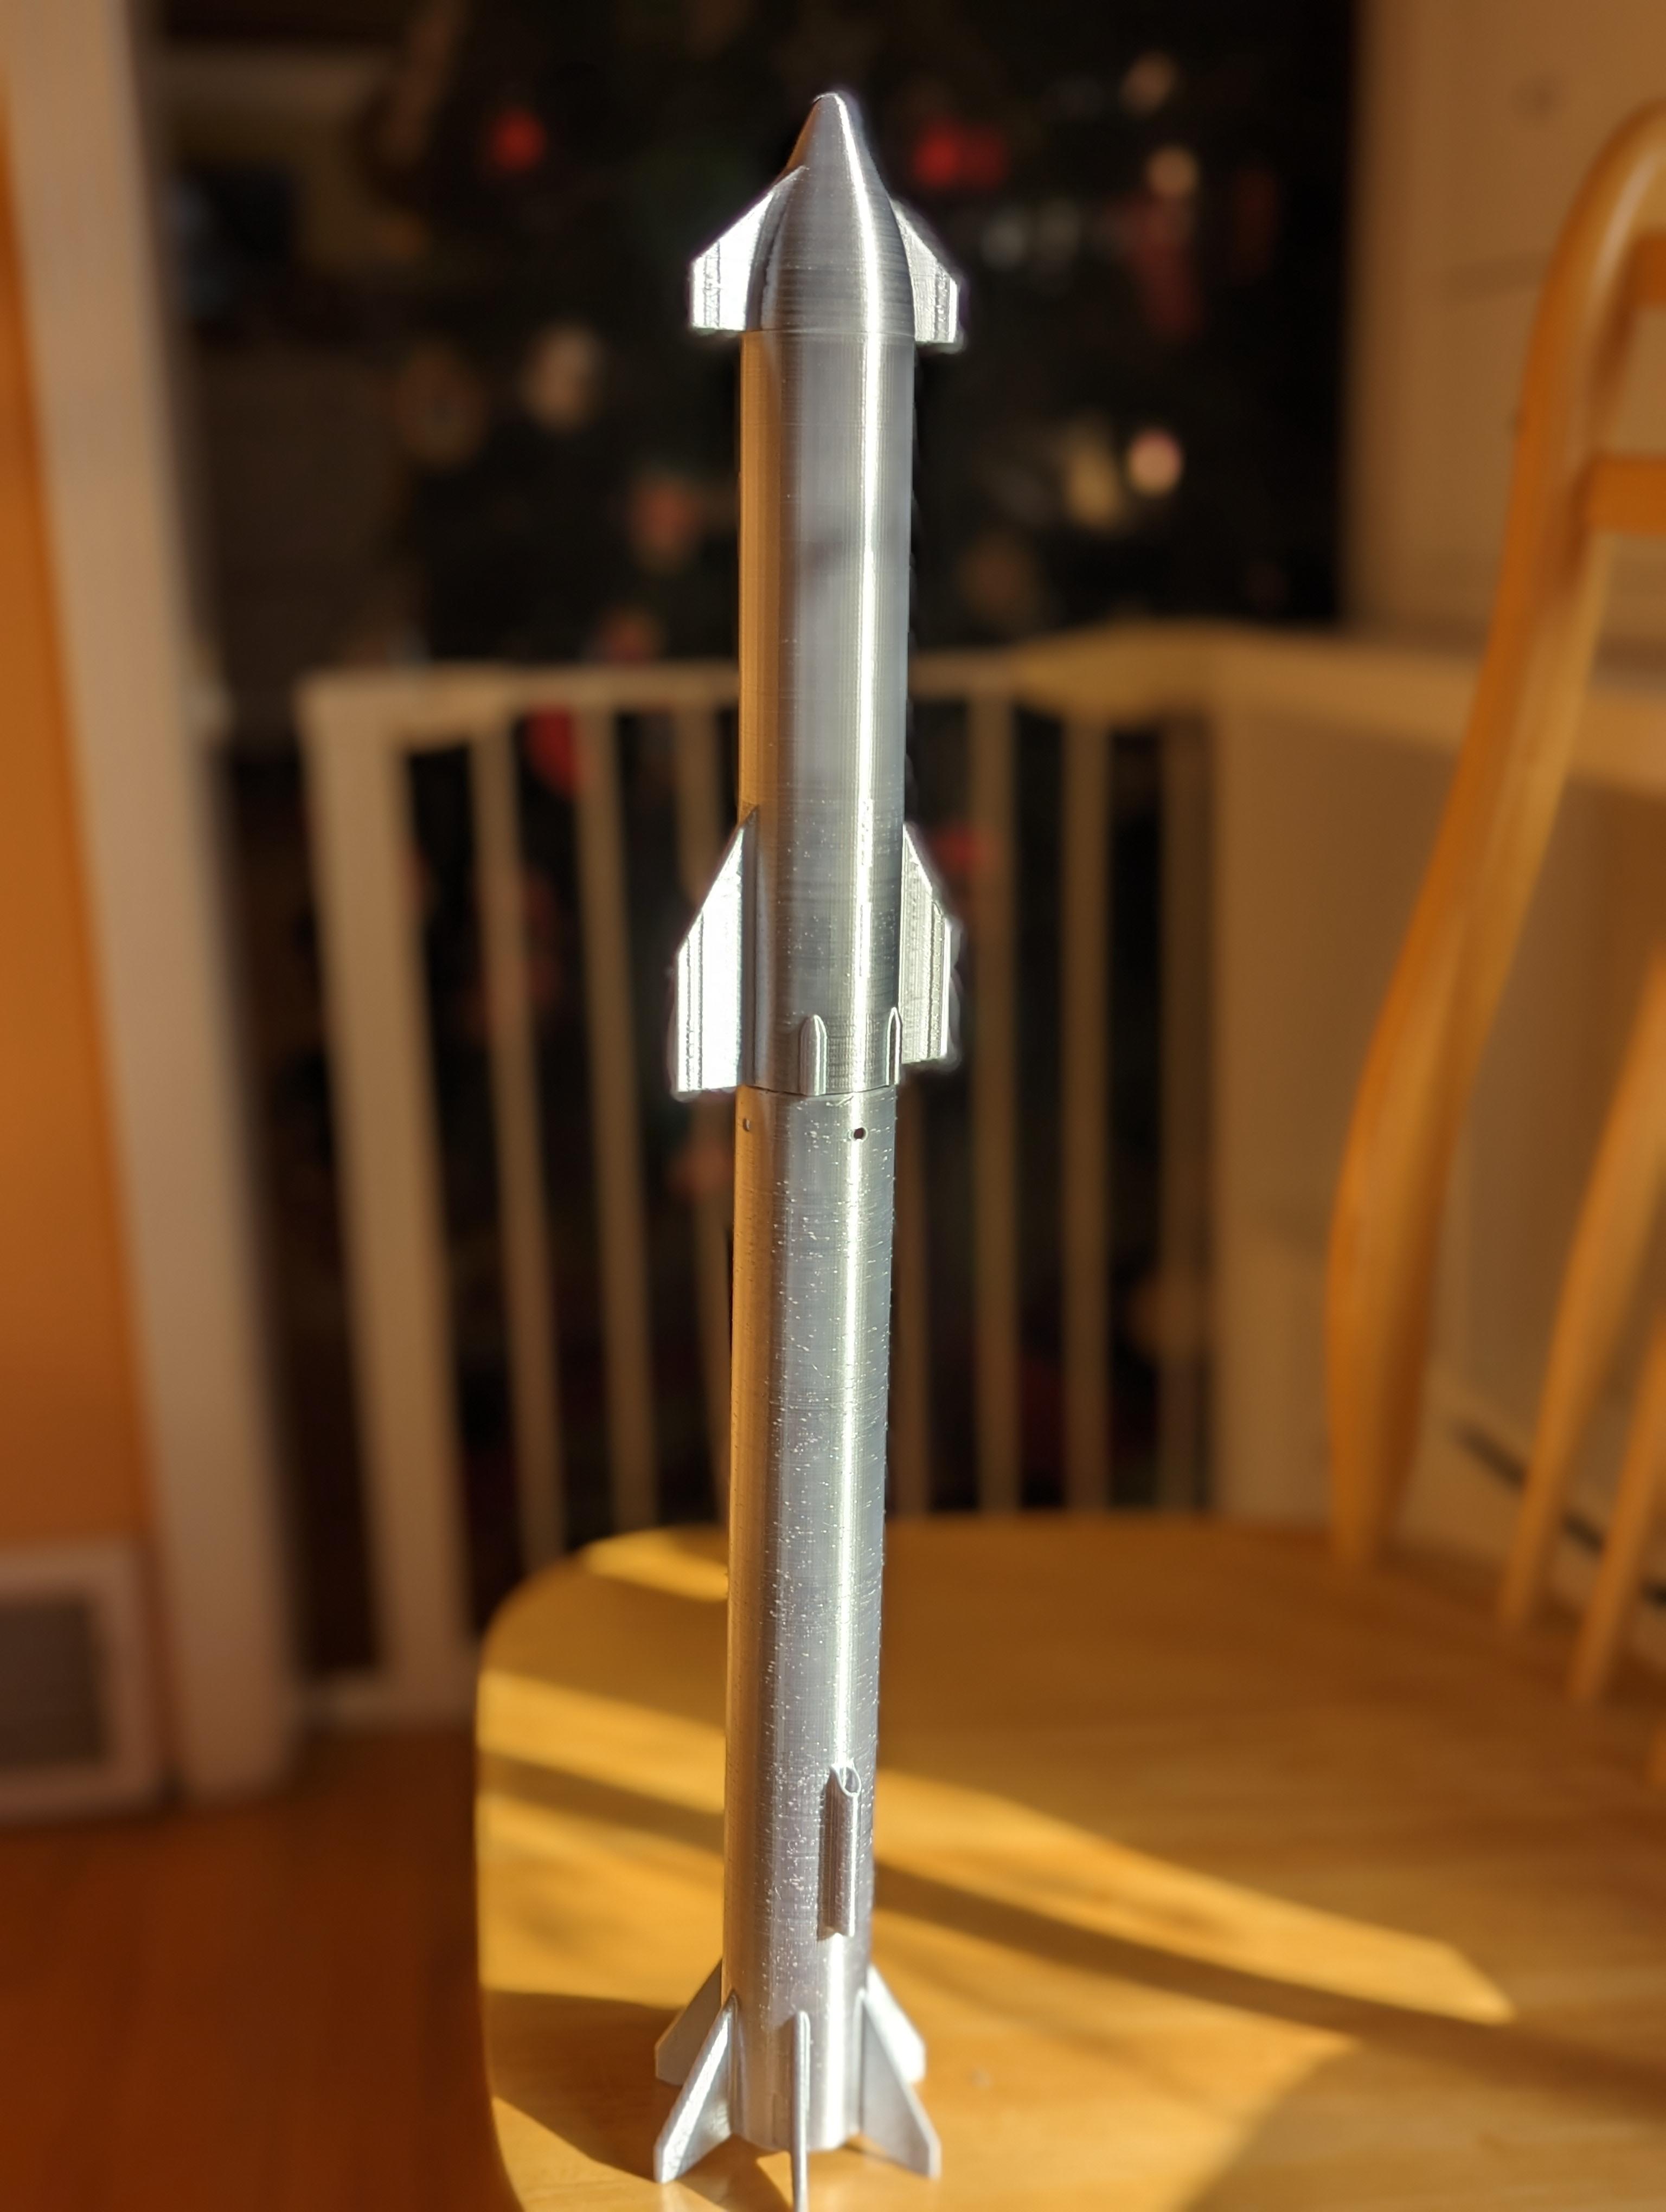 Starship Model Rocket with Heavy Booster Stage - Thanks for the model. It will make a beautiful gift. I can't wait to see it fly. Any tips on parachute size? Should I fold it into the main tube in the booster with wadding as usual?  What are the holes at the top of the booster intended for? Blowout prevention? - 3d model